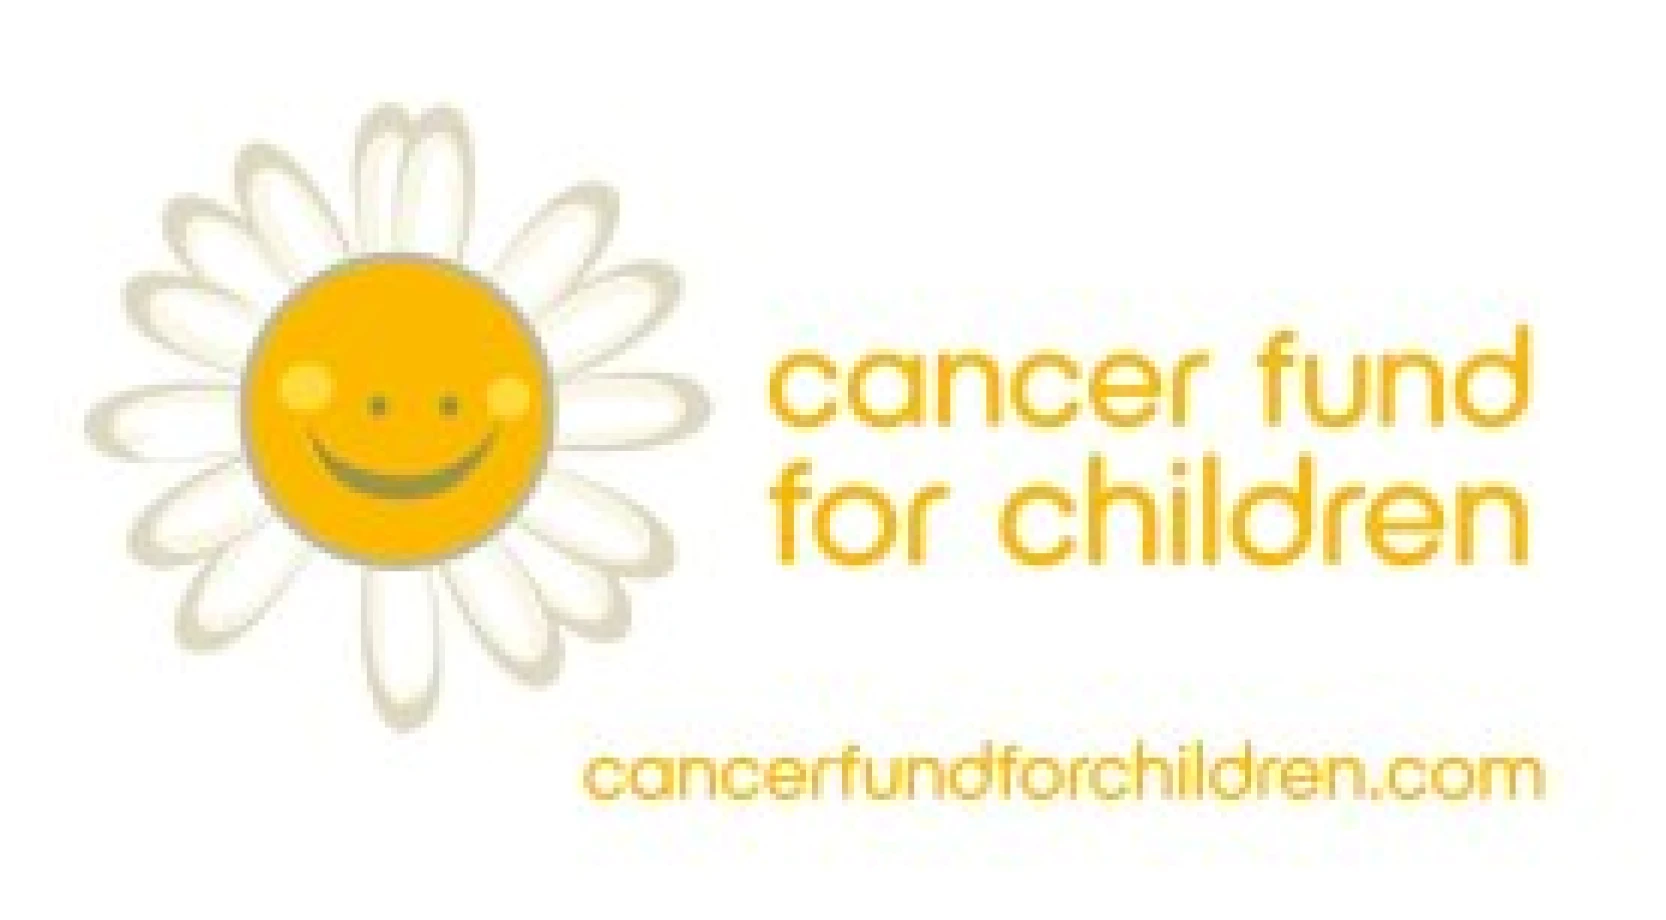 Cancer Fund for Children urgently needs a few hours of your time